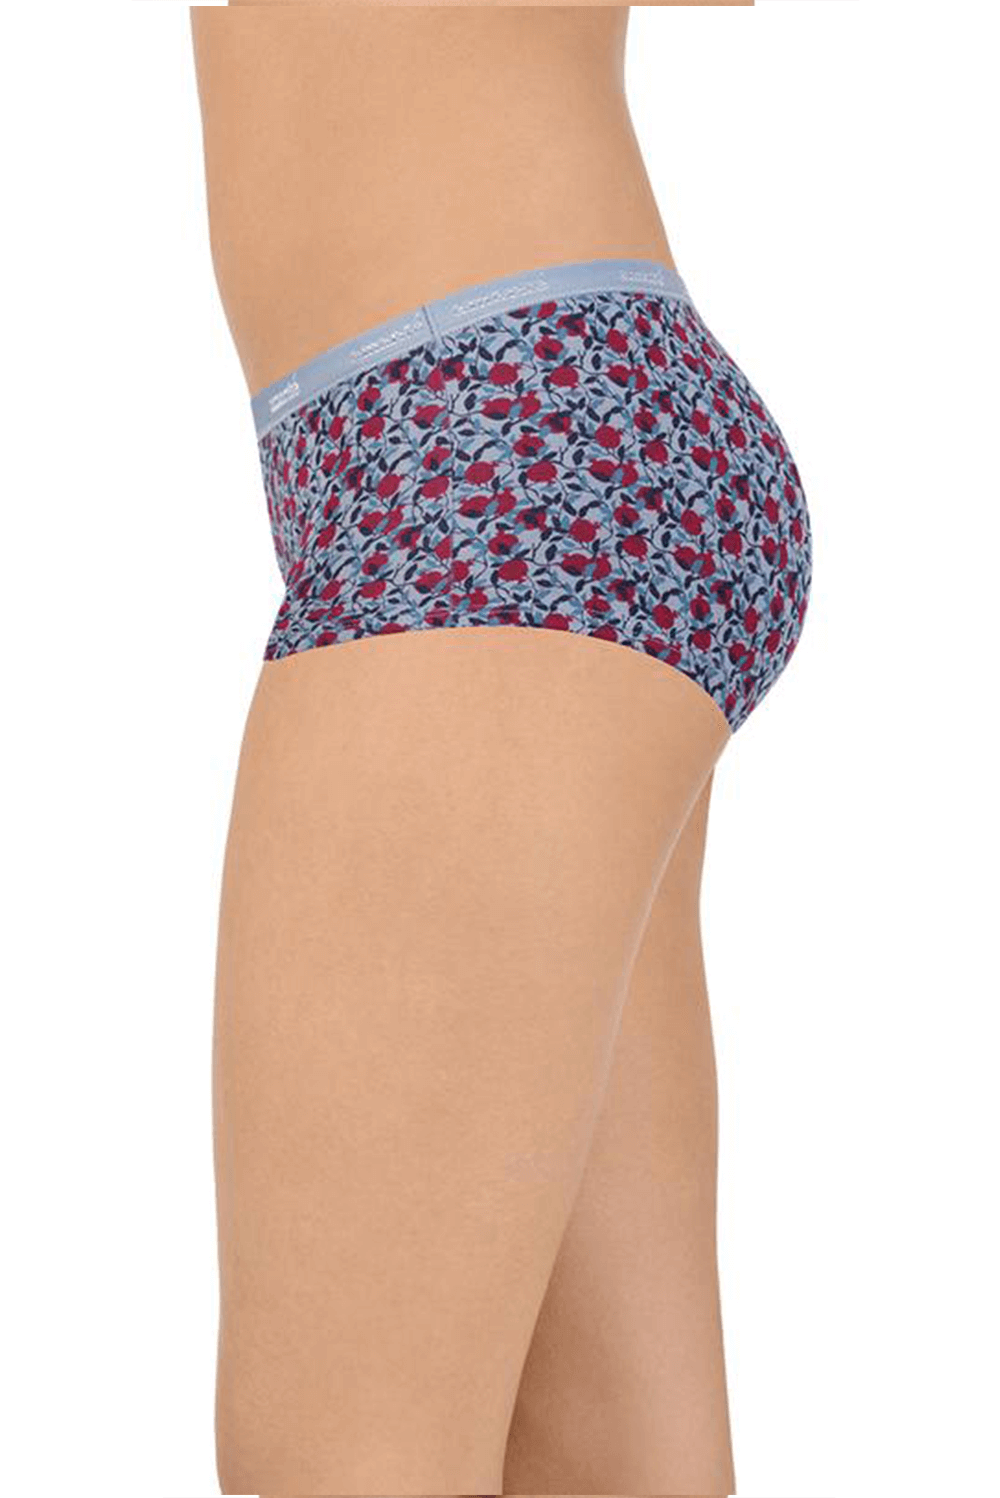 Amante Solid Low Rise Boyshorts (Pack of 2) Assorted L - PPK62101D0058S in  Gwalior at best price by Madia Hosiery - Justdial